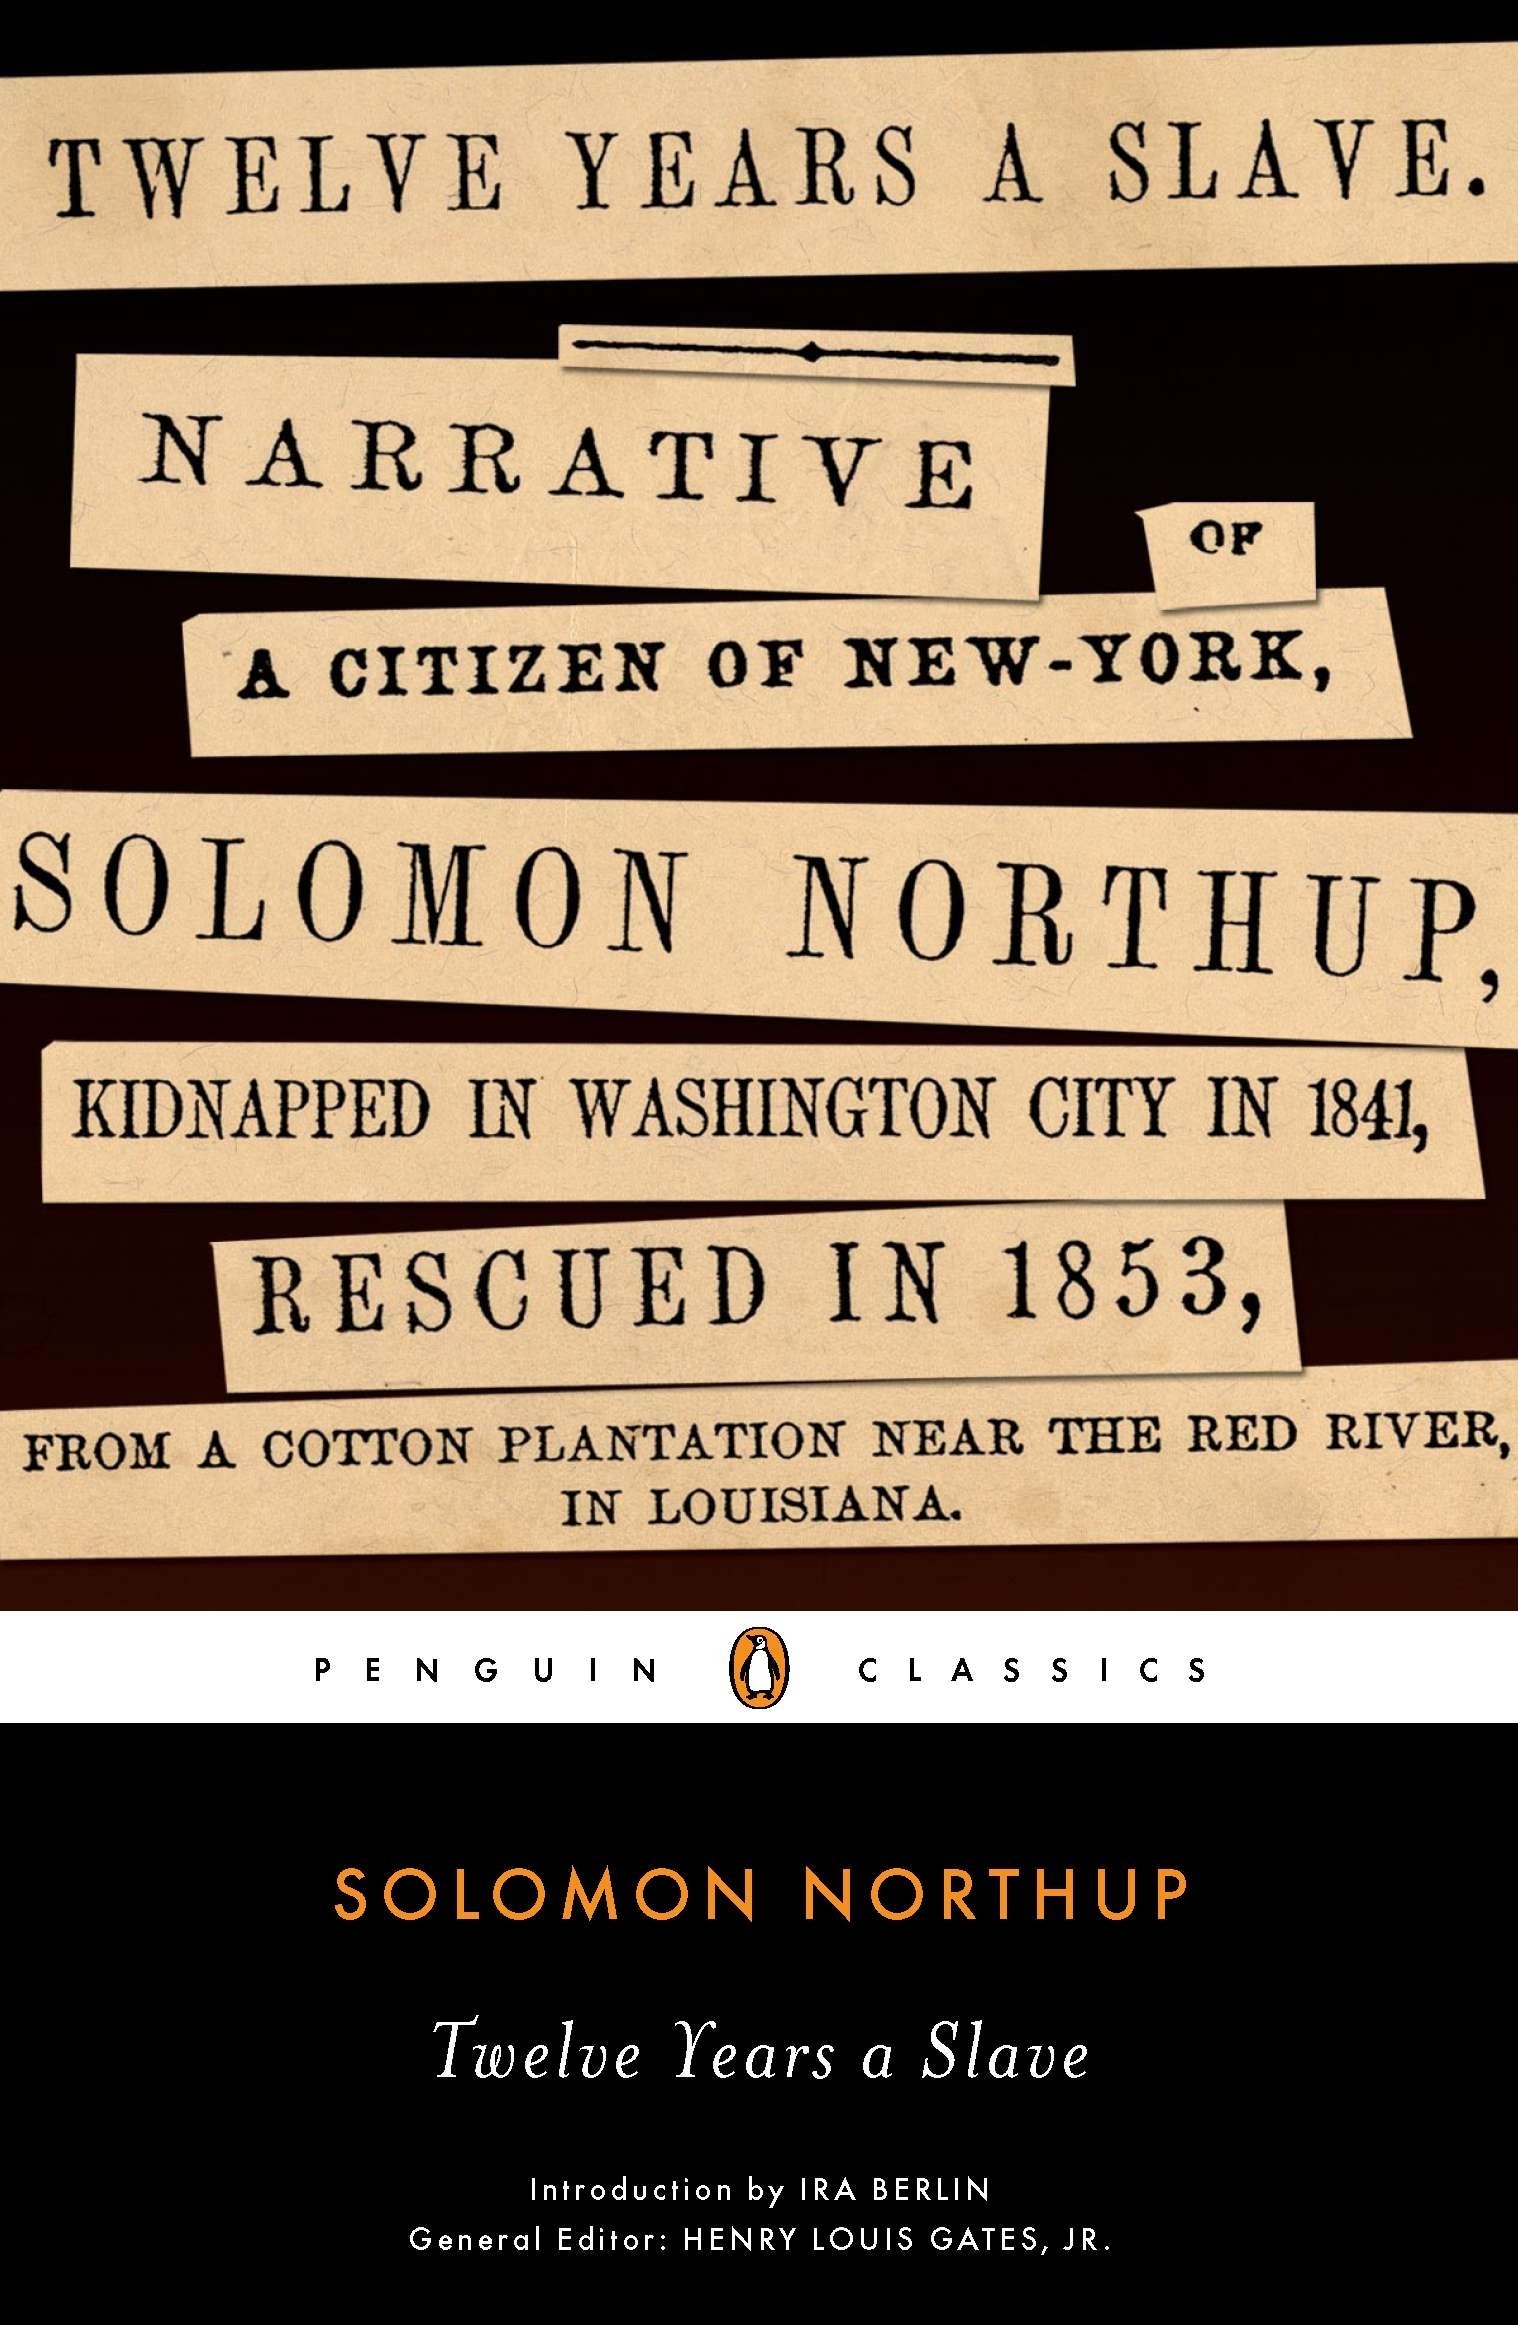 Book “Twelve Years a Slave” by Solomon Northup — November 1, 2012